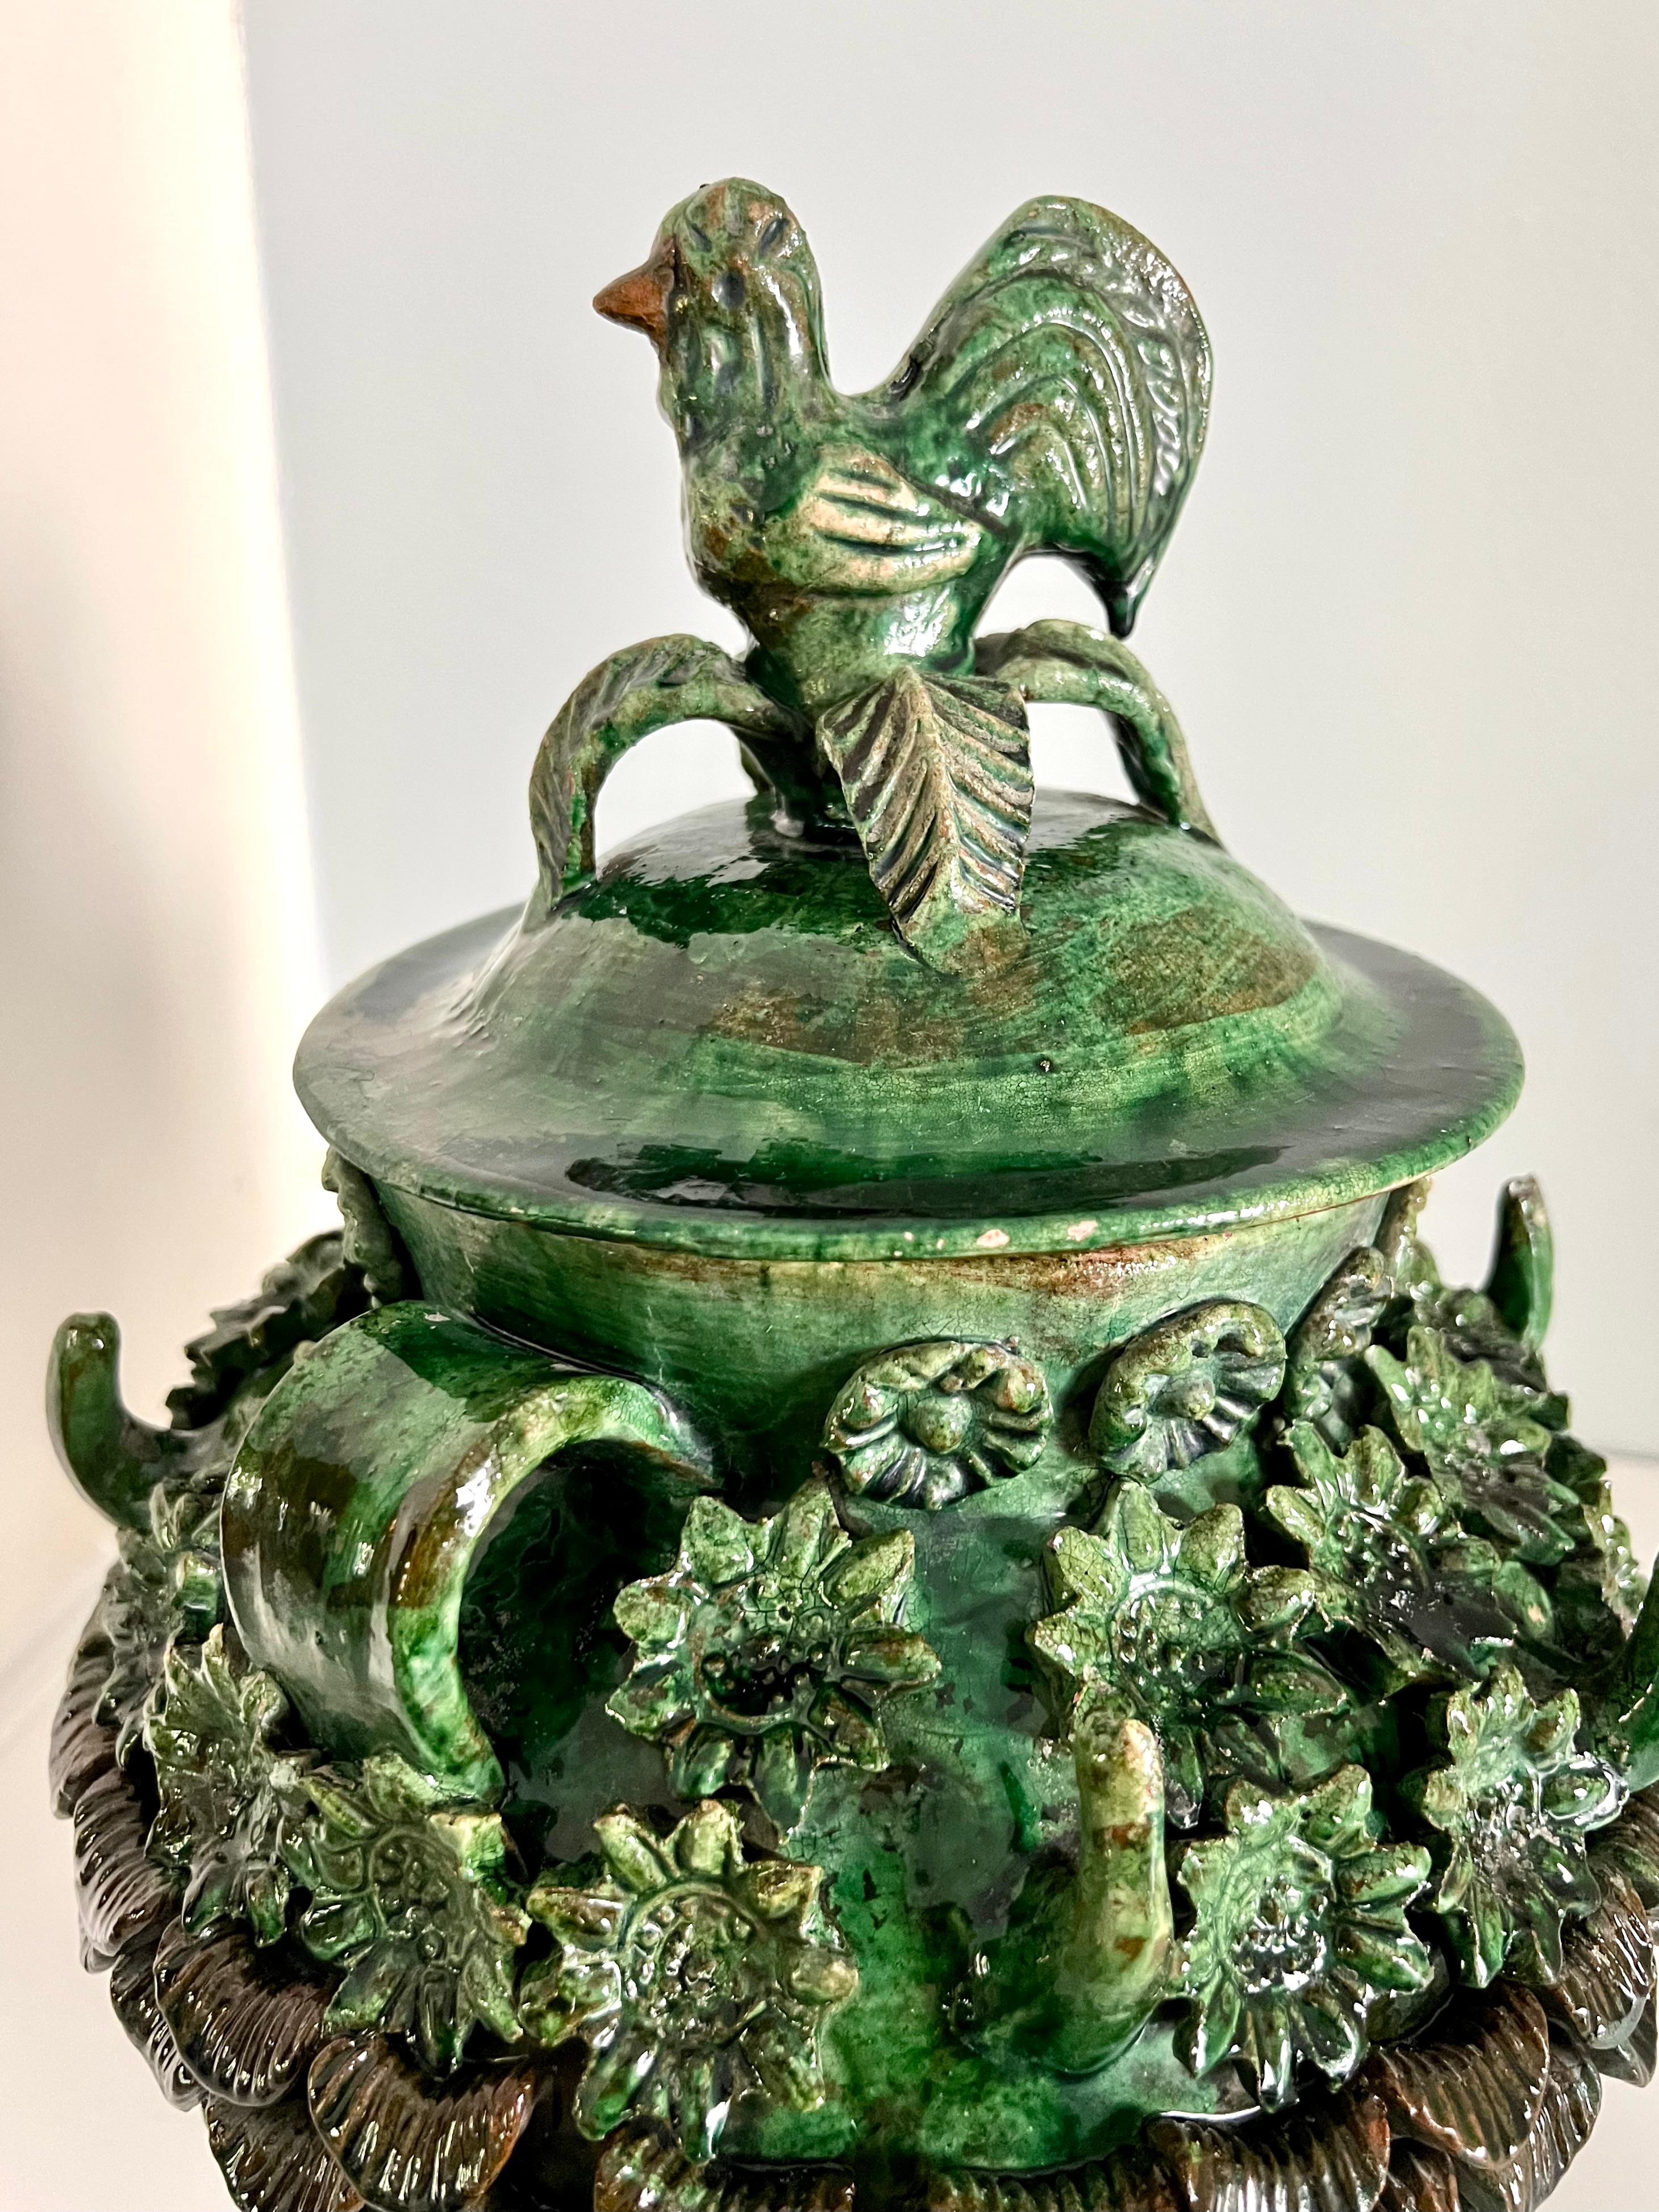 Hand-Crafted Glazed Majolica Lidded Jar Container with Flowers and Rooster on Legs